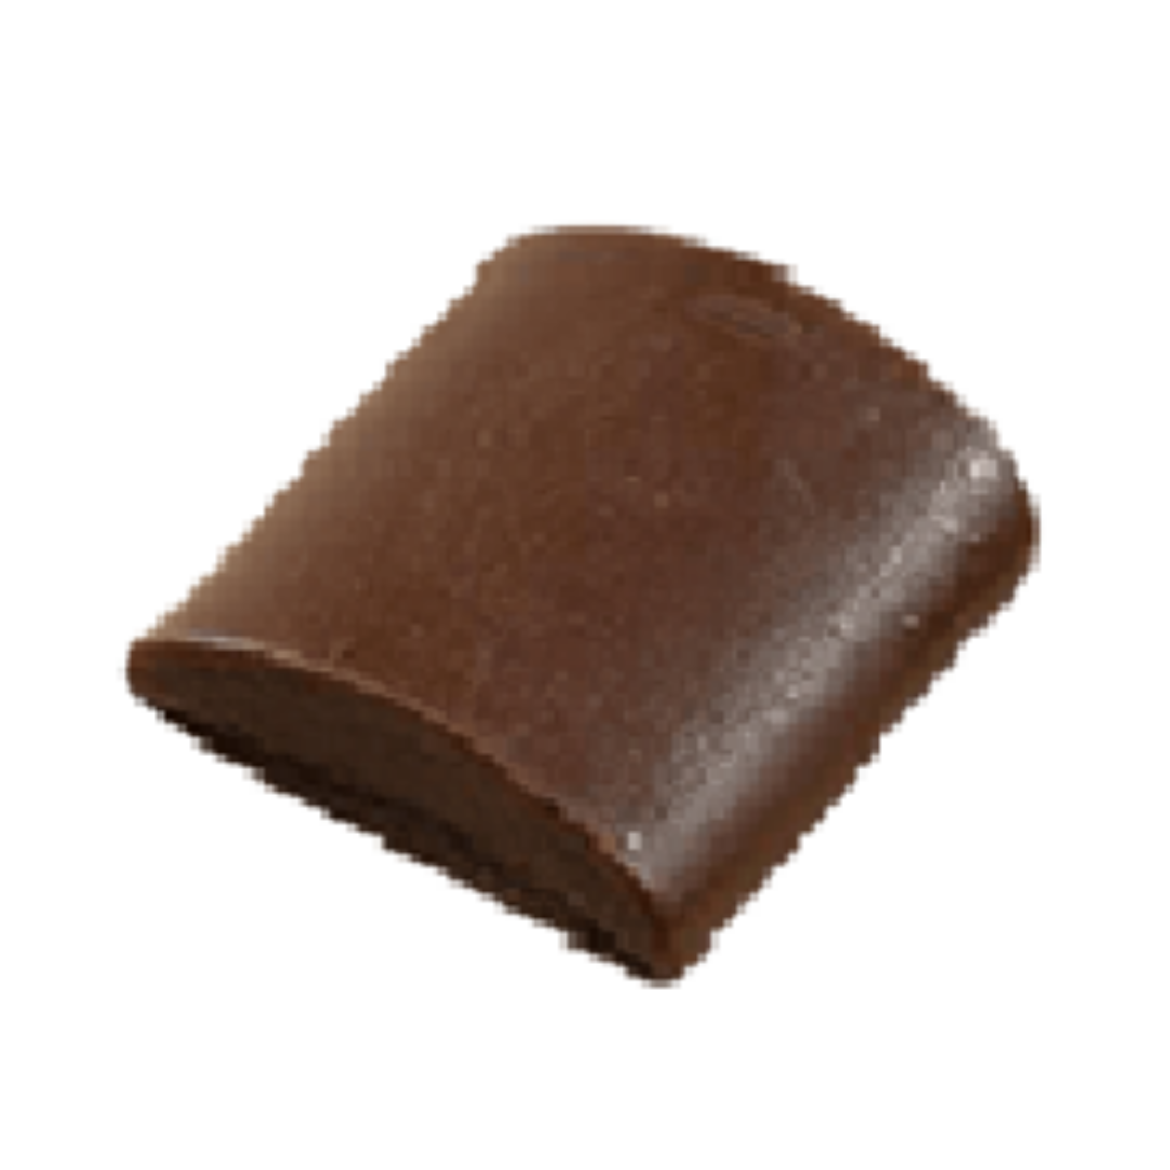 Picture of 5KG KINGSTON CHOCOLATE